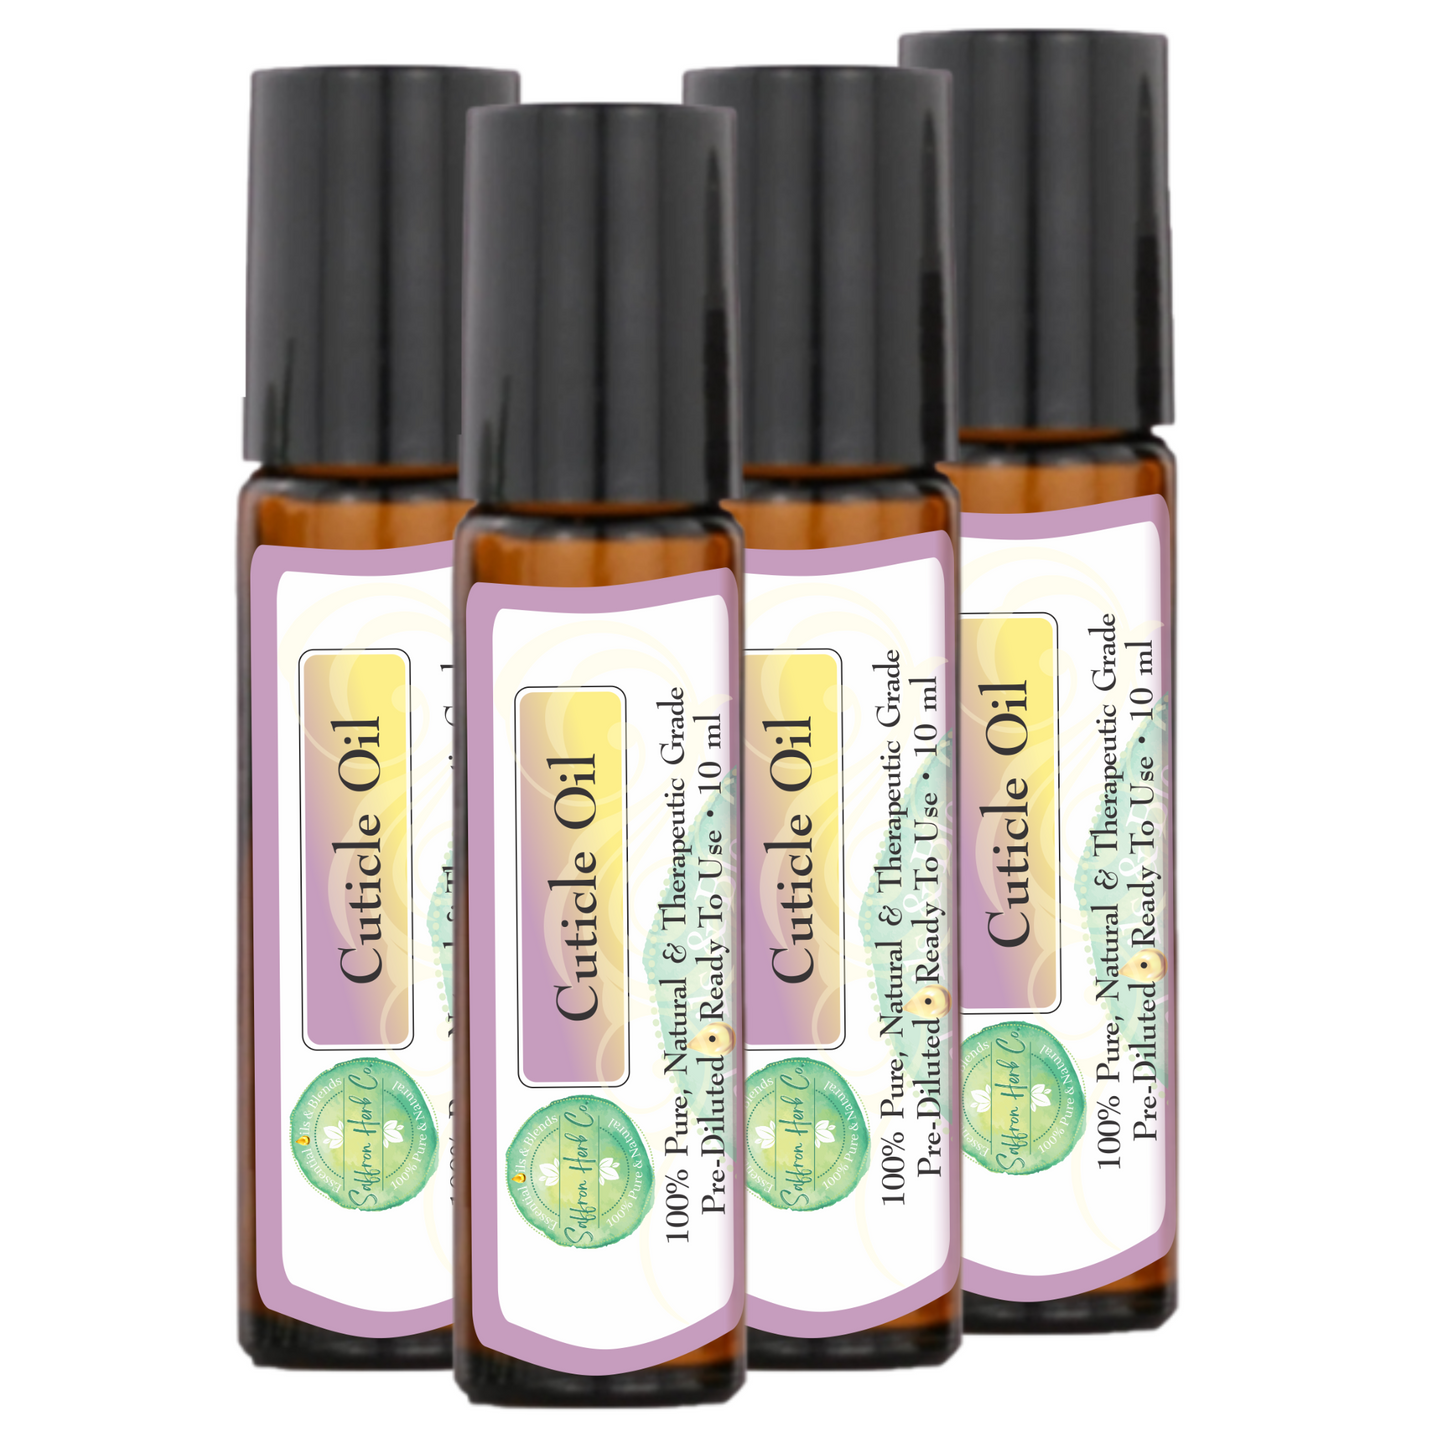 Cuticle Oil Essential Oil Roller Bottle Blend • 100% Pure & Natural • Pre-Diluted • Ready To Use